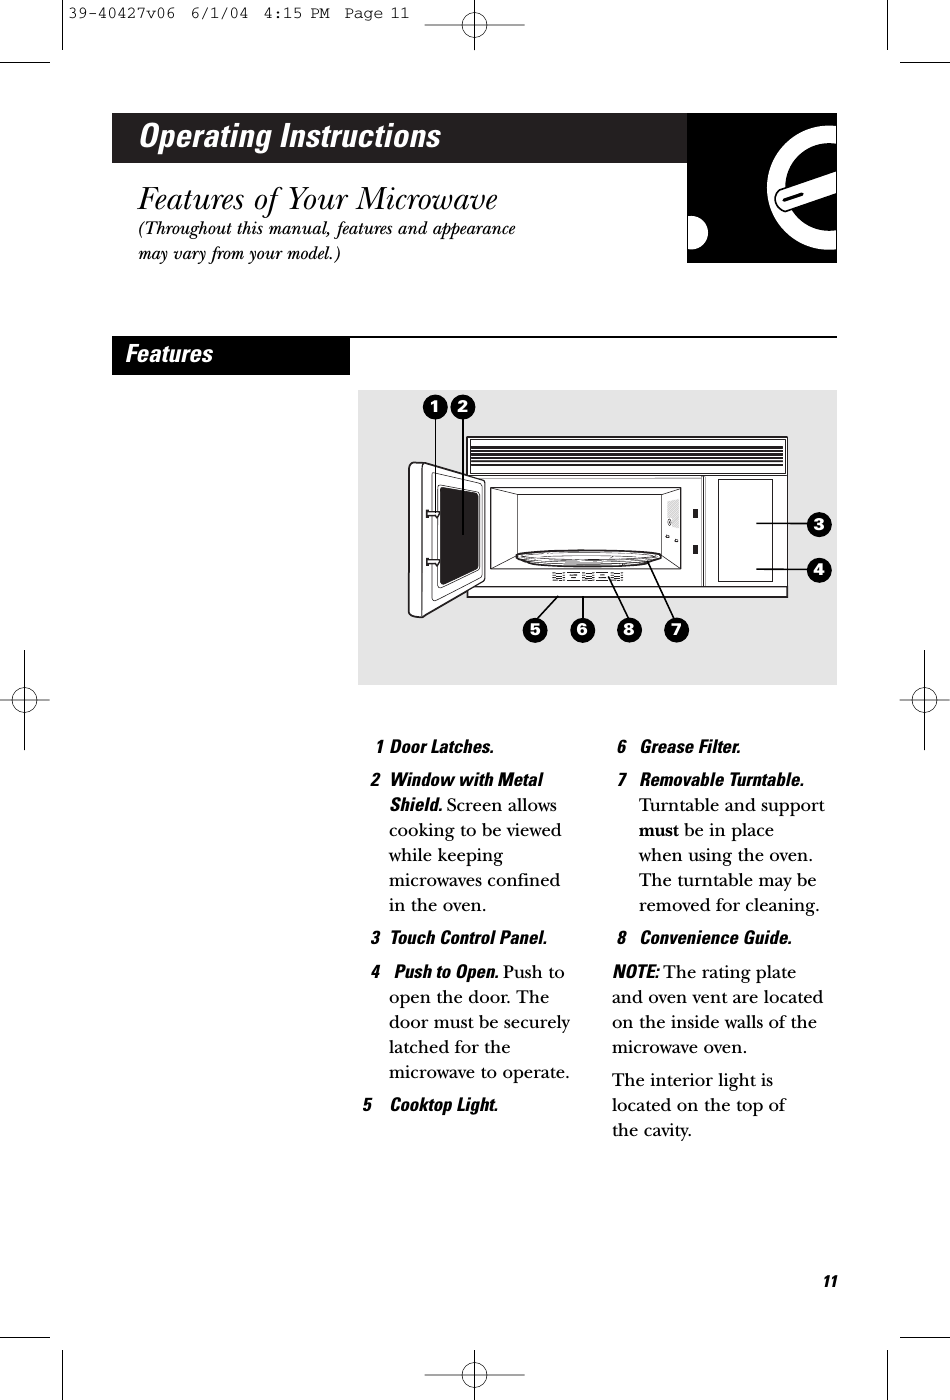 Operating InstructionsFeatures of Your Microwave(Throughout this manual, features and appearancemay vary from your model.)1 Door Latches.2 Window with MetalShield. Screen allowscooking to be viewedwhile keepingmicrowaves confined in the oven.3 Touch Control Panel. 4 Push to Open. Push toopen the door. Thedoor must be securelylatched for themicrowave to operate.5 Cooktop Light.6 Grease Filter.7 Removable Turntable.Turntable and supportmust be in place when using the oven.The turntable may beremoved for cleaning.8 Convenience Guide.NOTE: The rating plate and oven vent are locatedon the inside walls of themicrowave oven.The interior light islocated on the top of the cavity.Features215871163439-40427v06  6/1/04  4:15 PM  Page 11